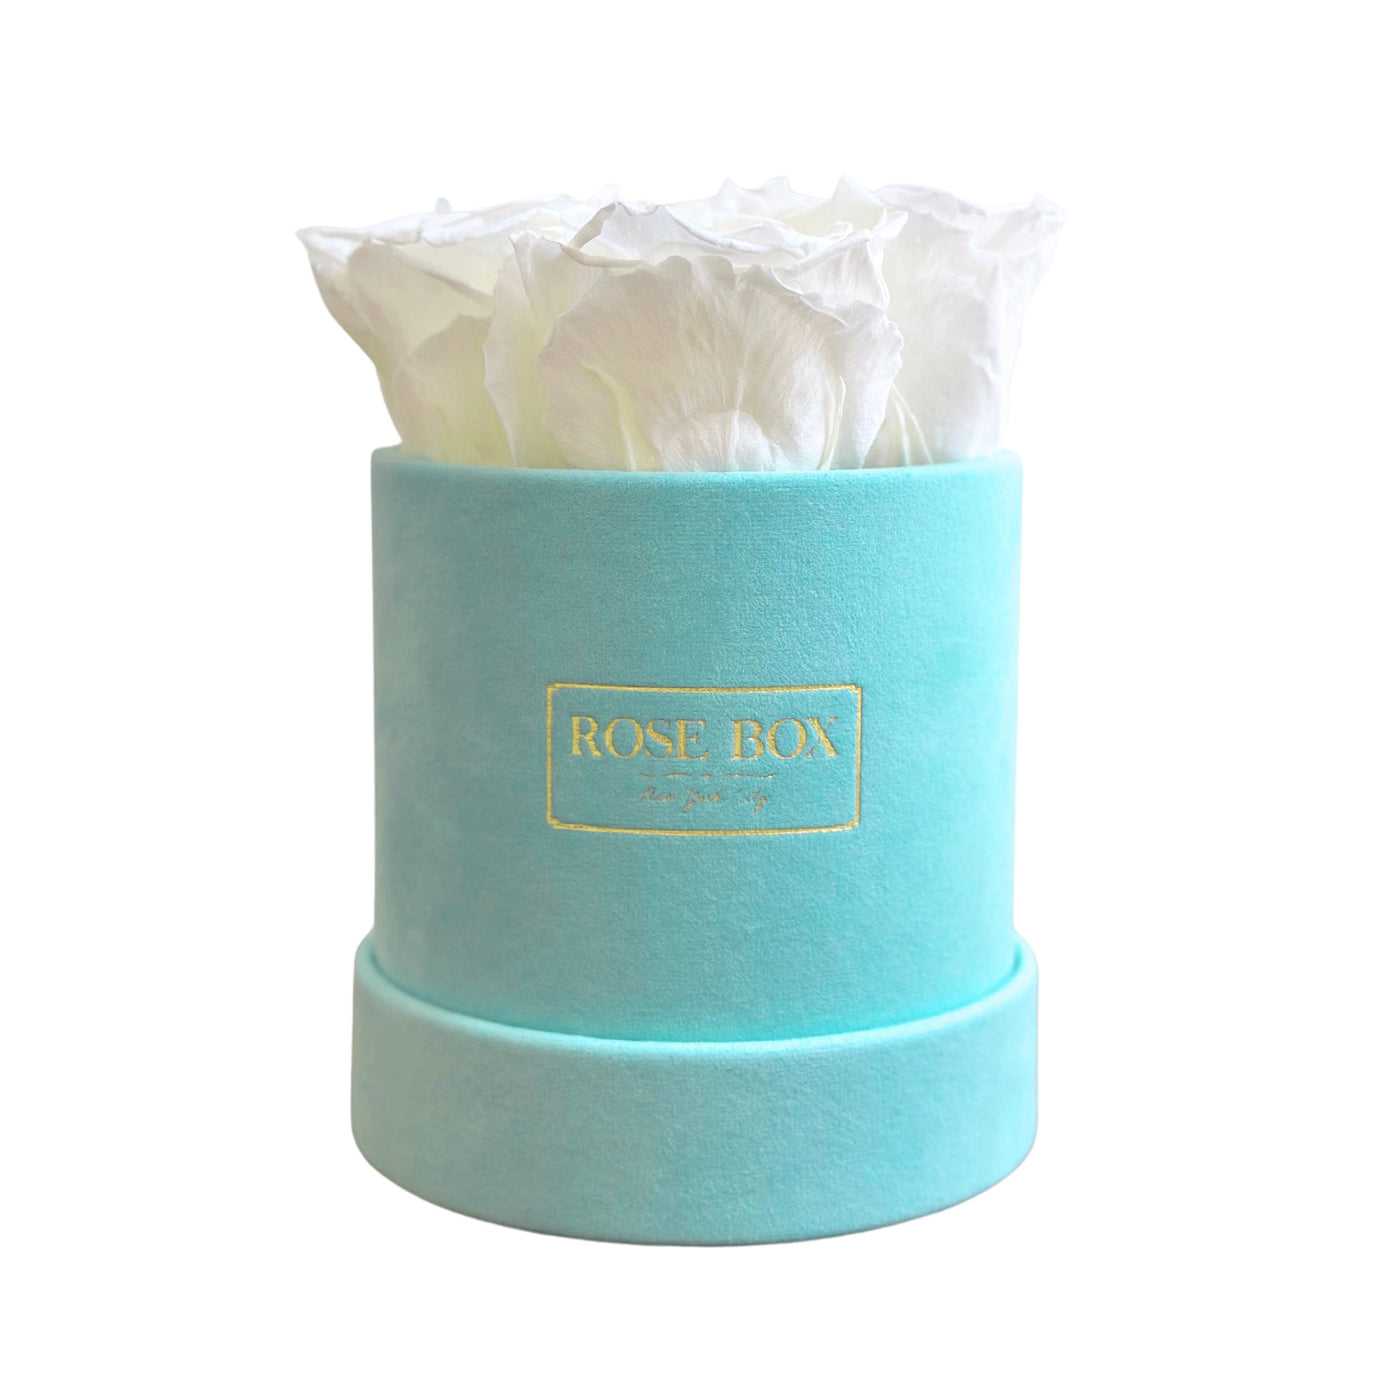 Mini Turquoise Box with Pure White Roses